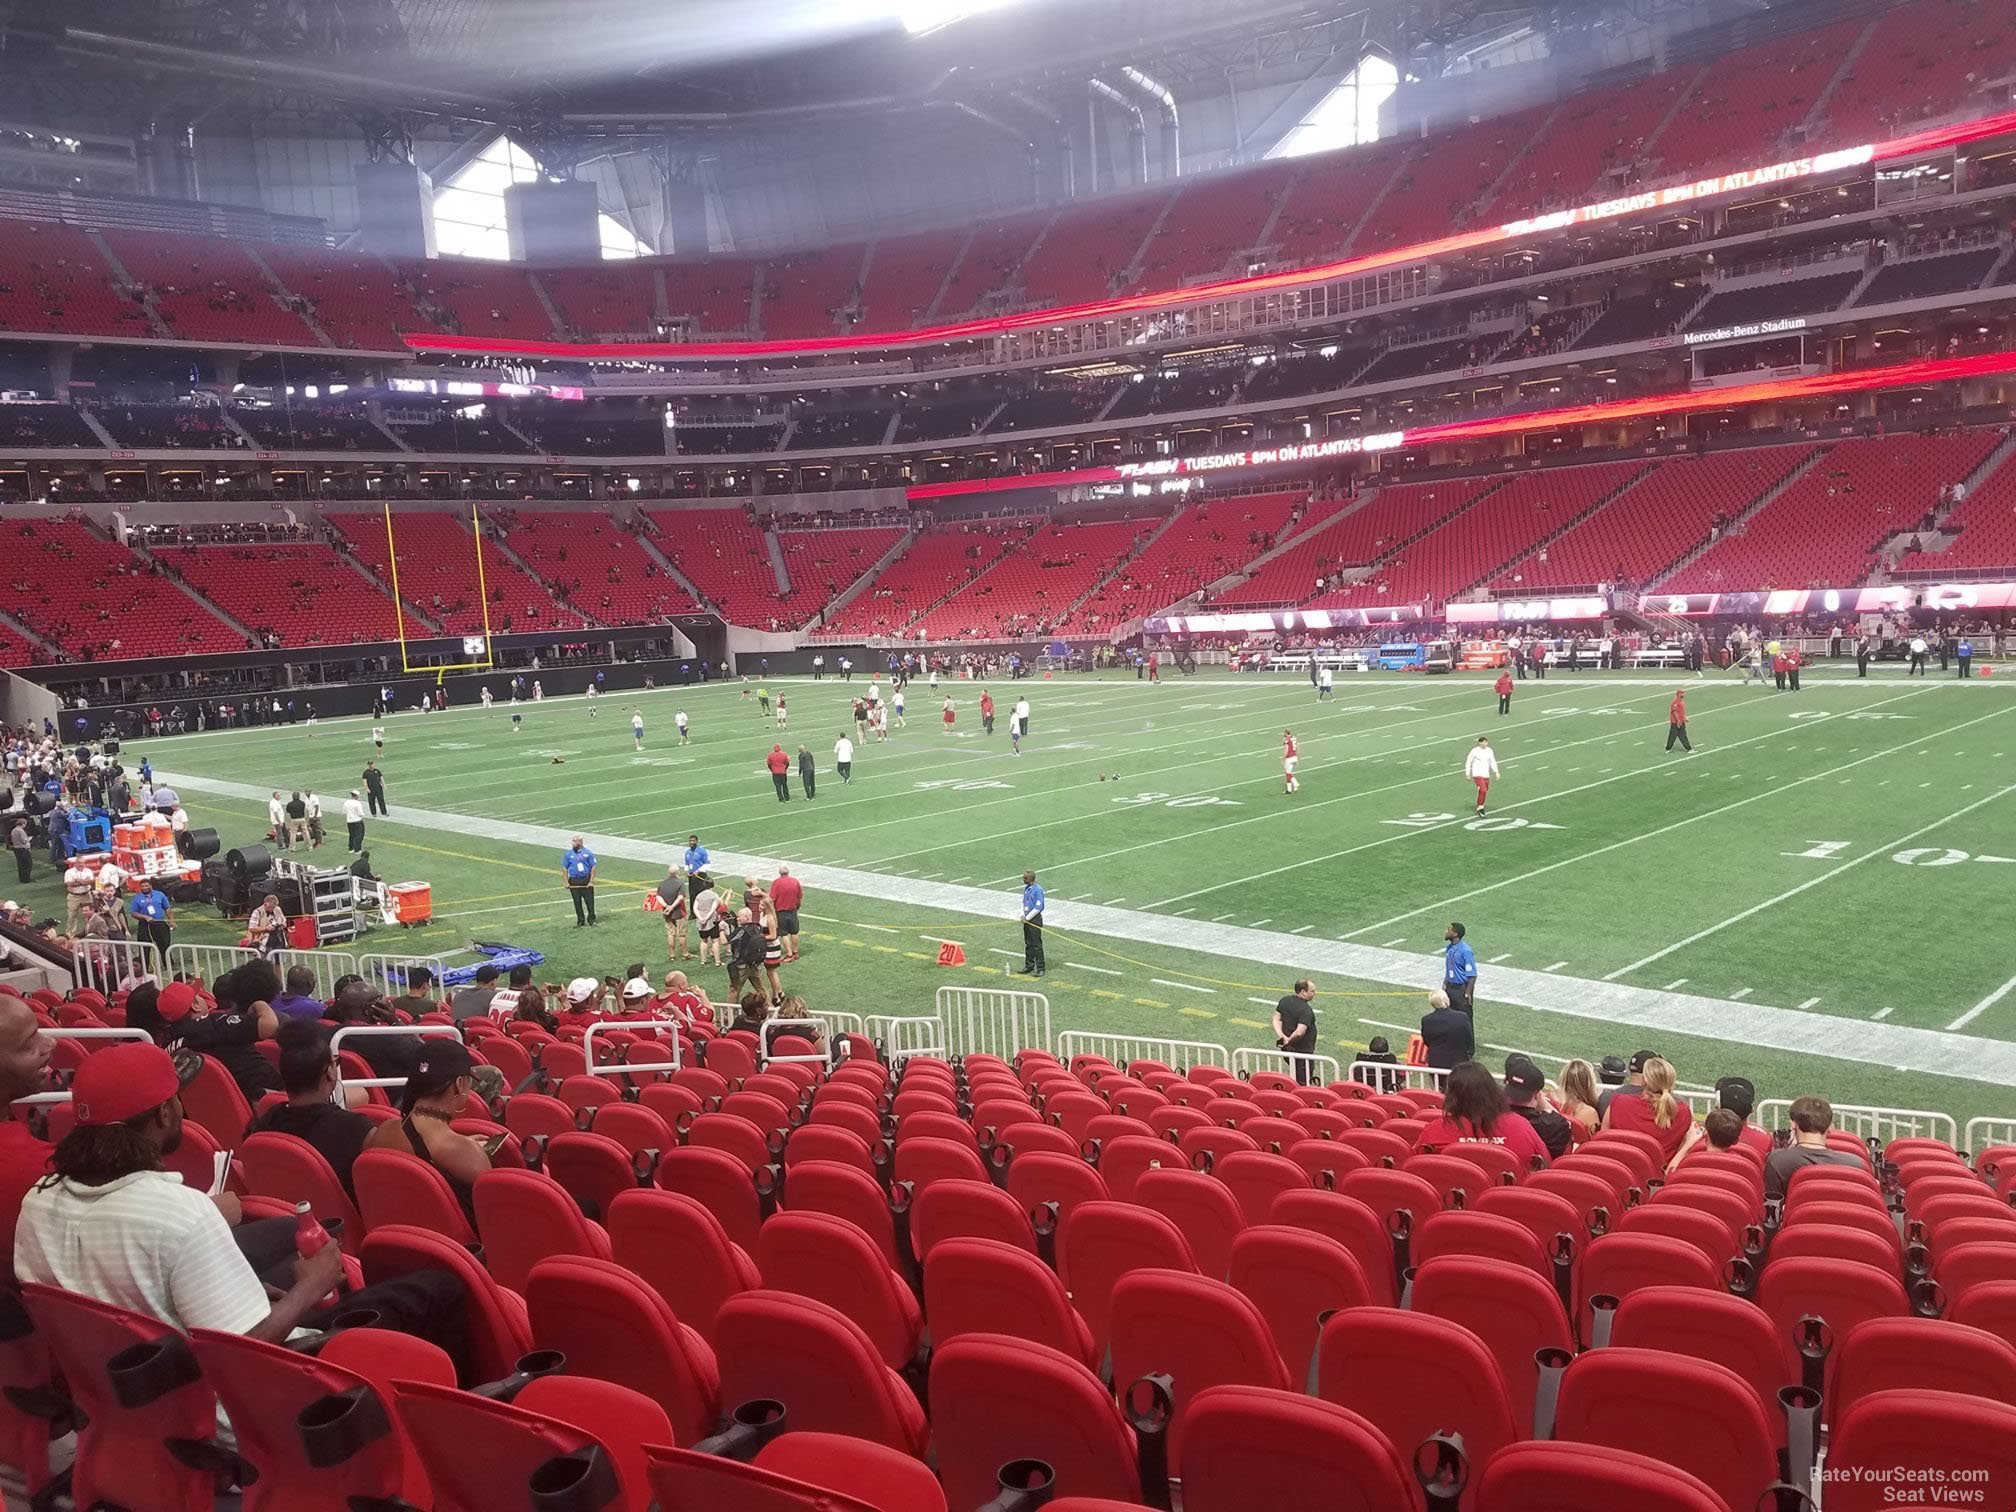 section 104, row 14 seat view  for football - mercedes-benz stadium